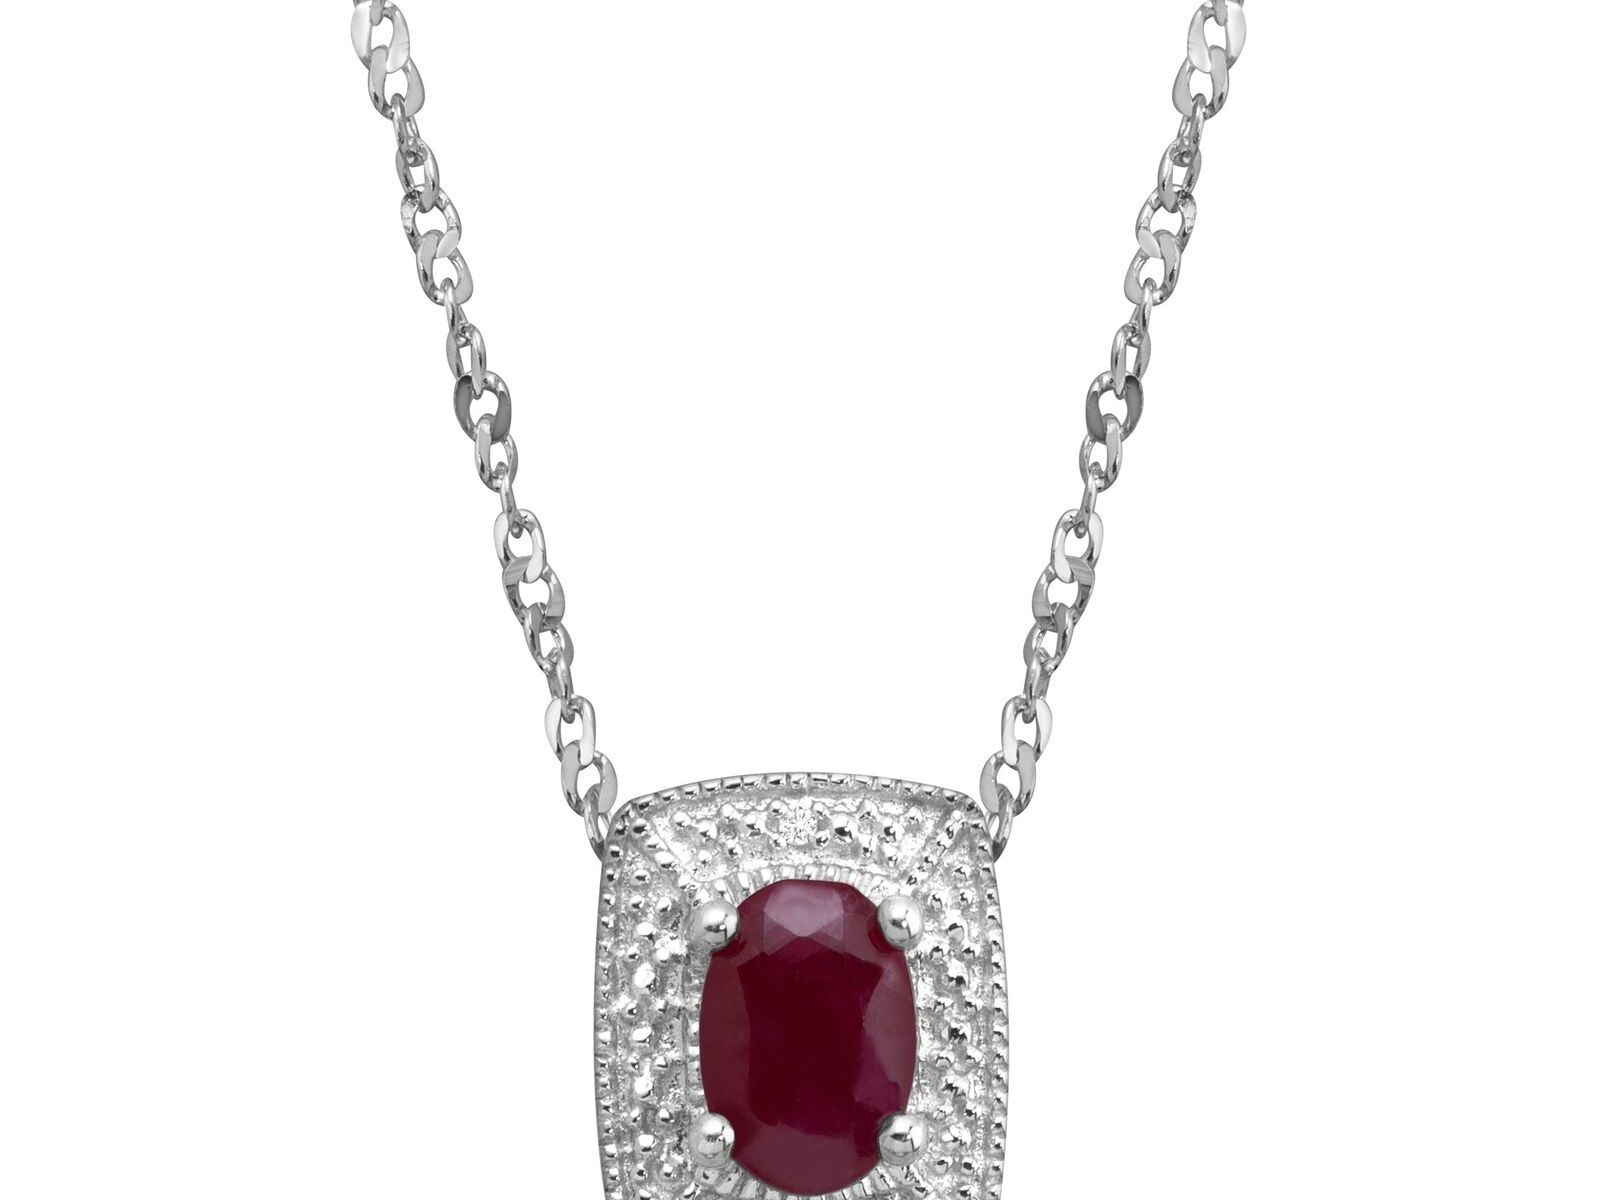 5/8 ct Natural Ruby Pendant with Diamonds in Sterling Silver